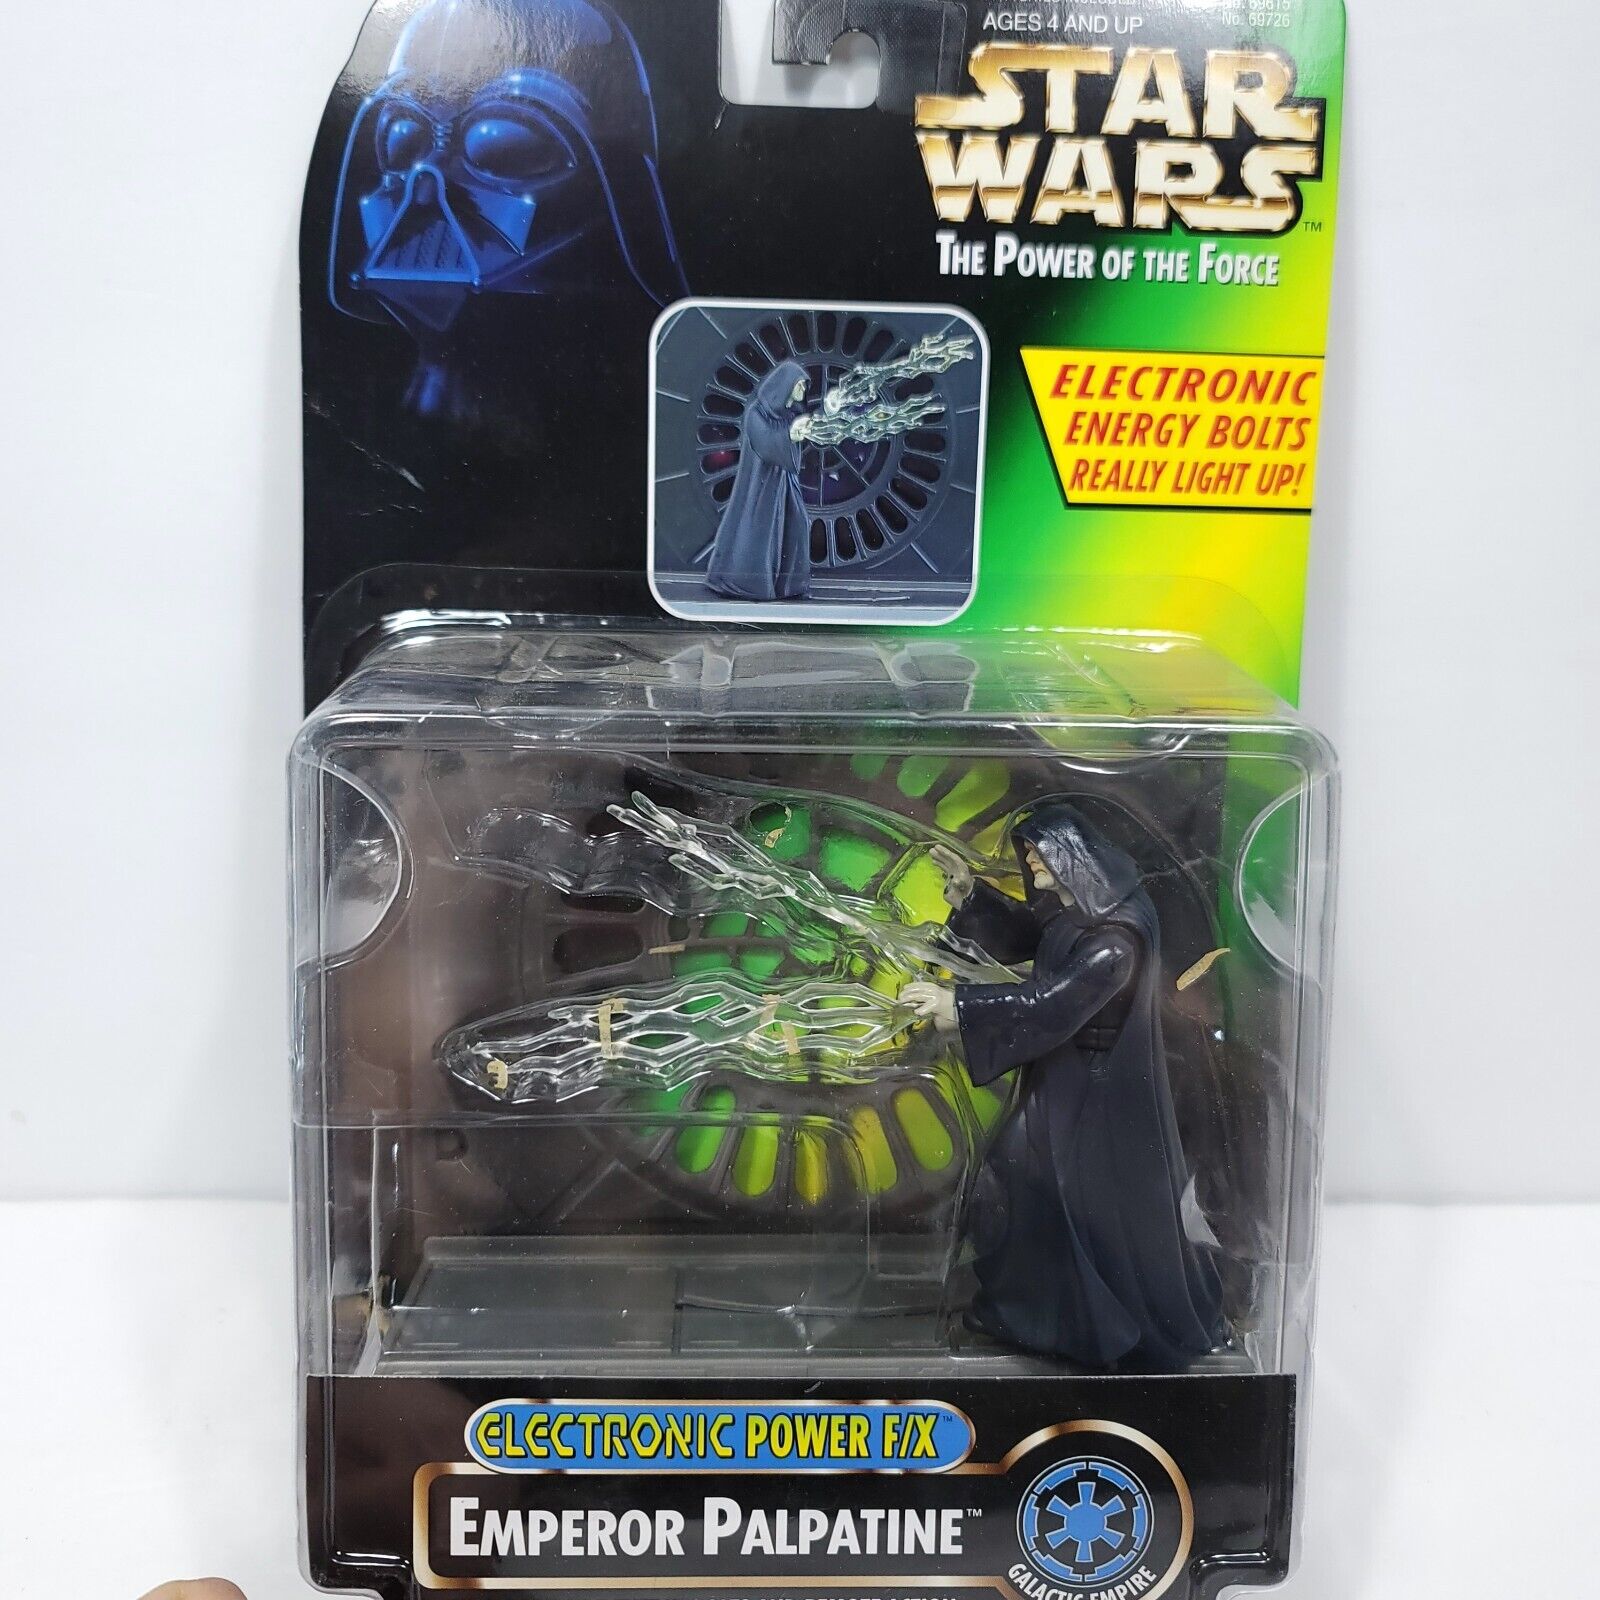 Star Wars Power of the Force Electronic Power F/X Emperor Palpatine